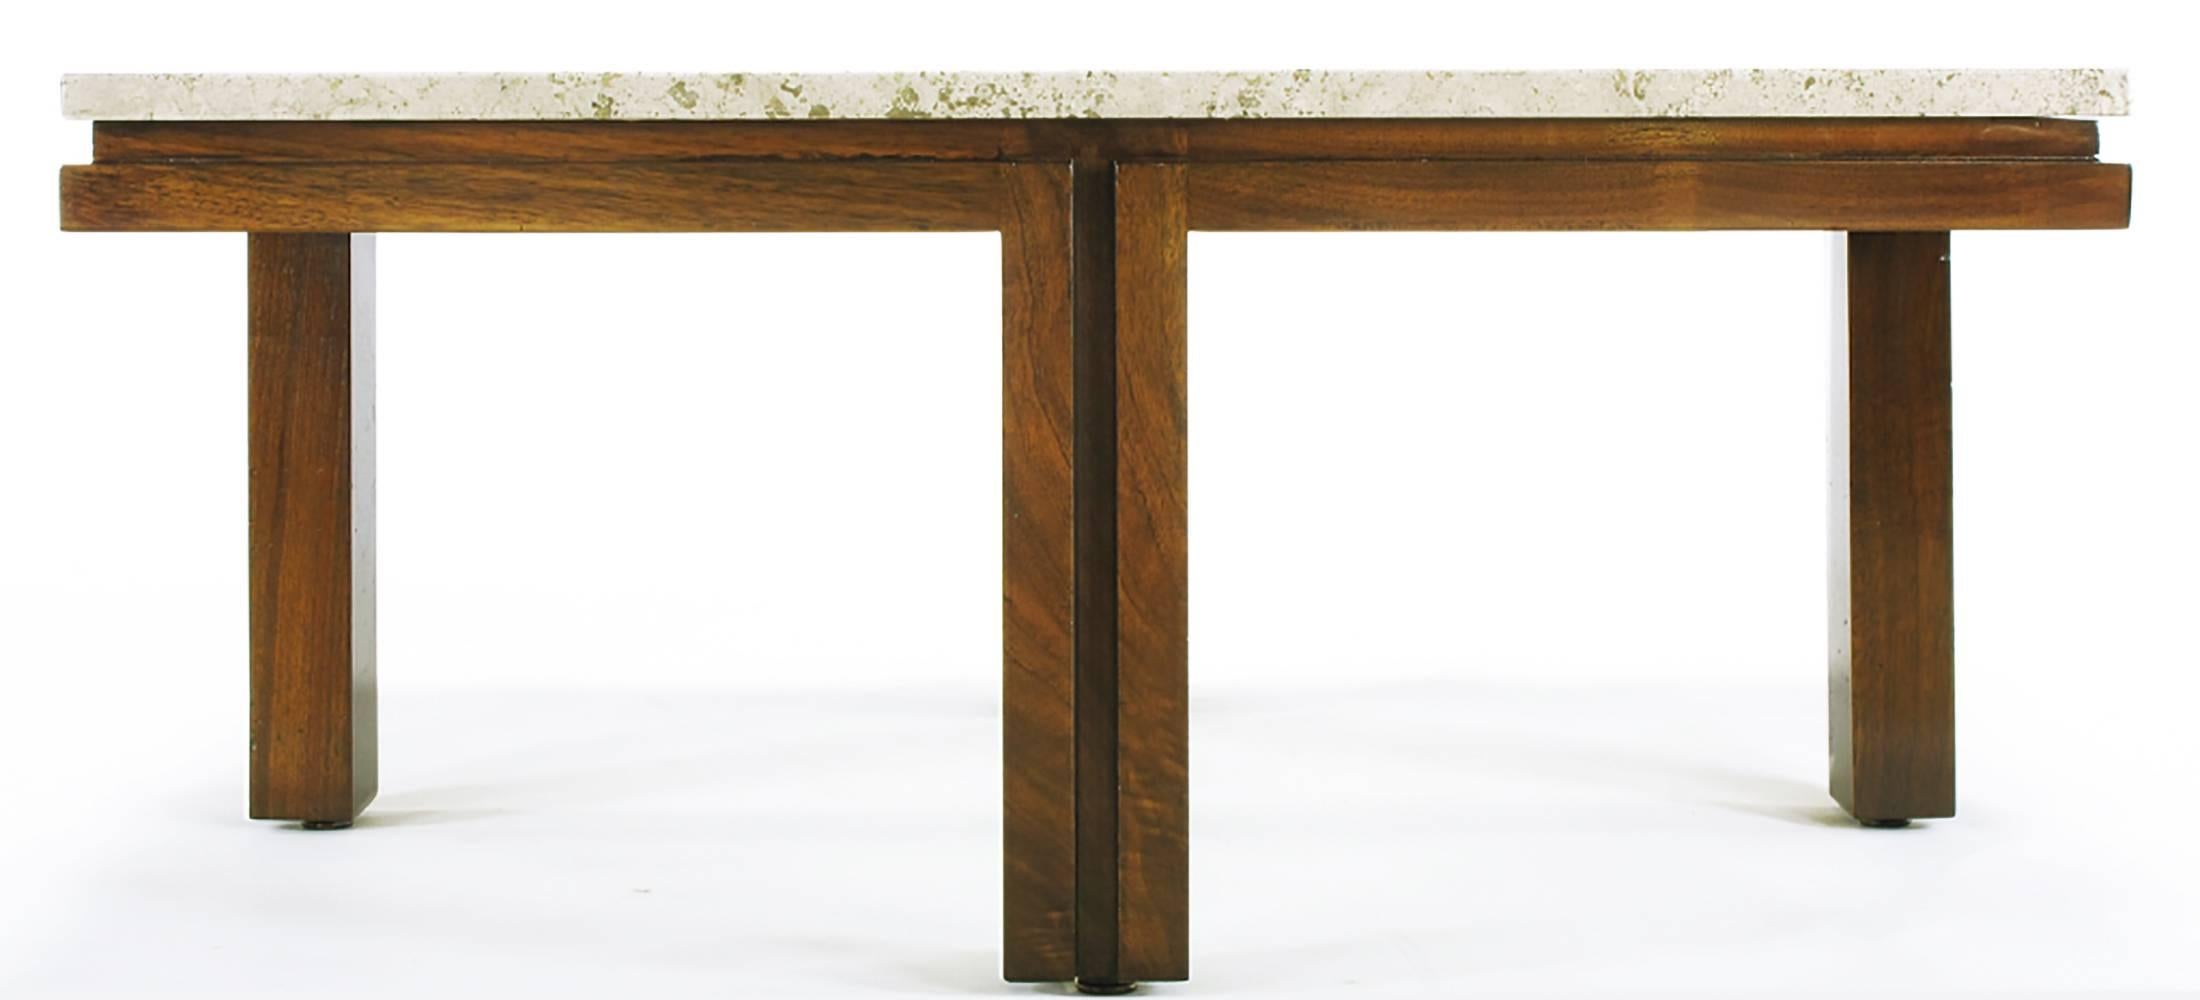 Italian Walnut and Travertine Square Coffee Table with Offset Legs